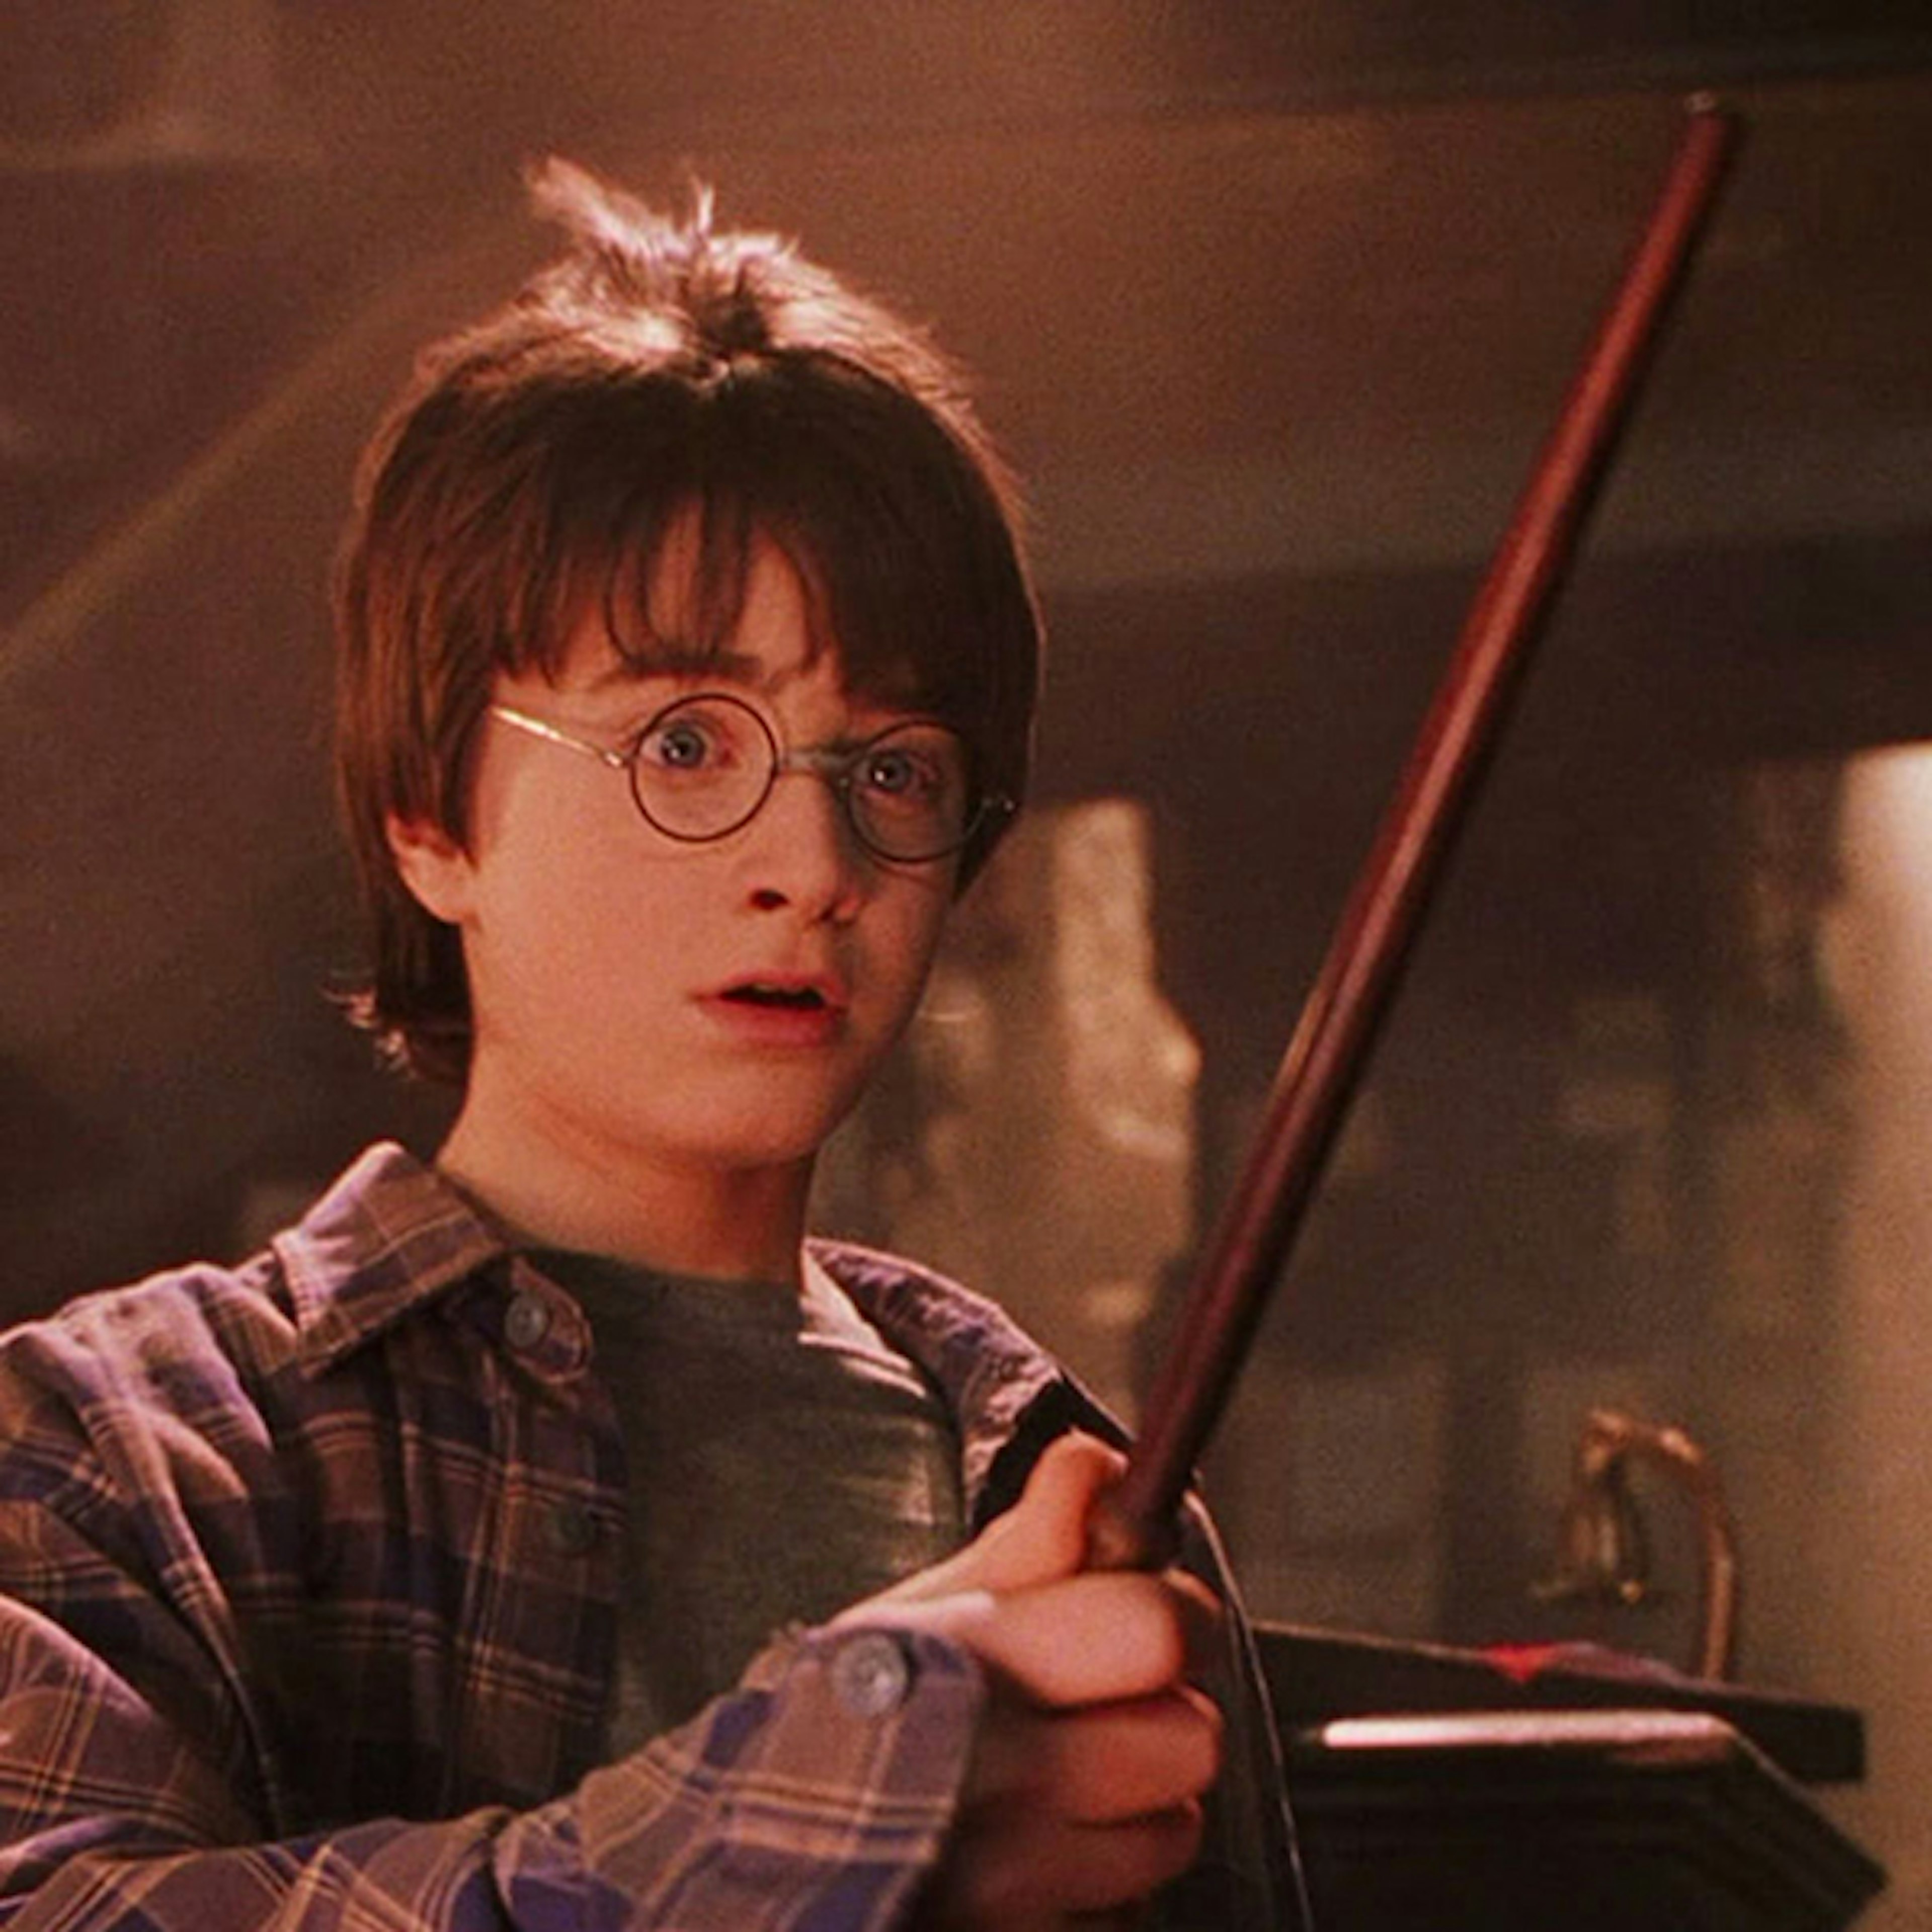 Harry Potter holding his wand in Ollivander's shop in the Philosopher's Stone